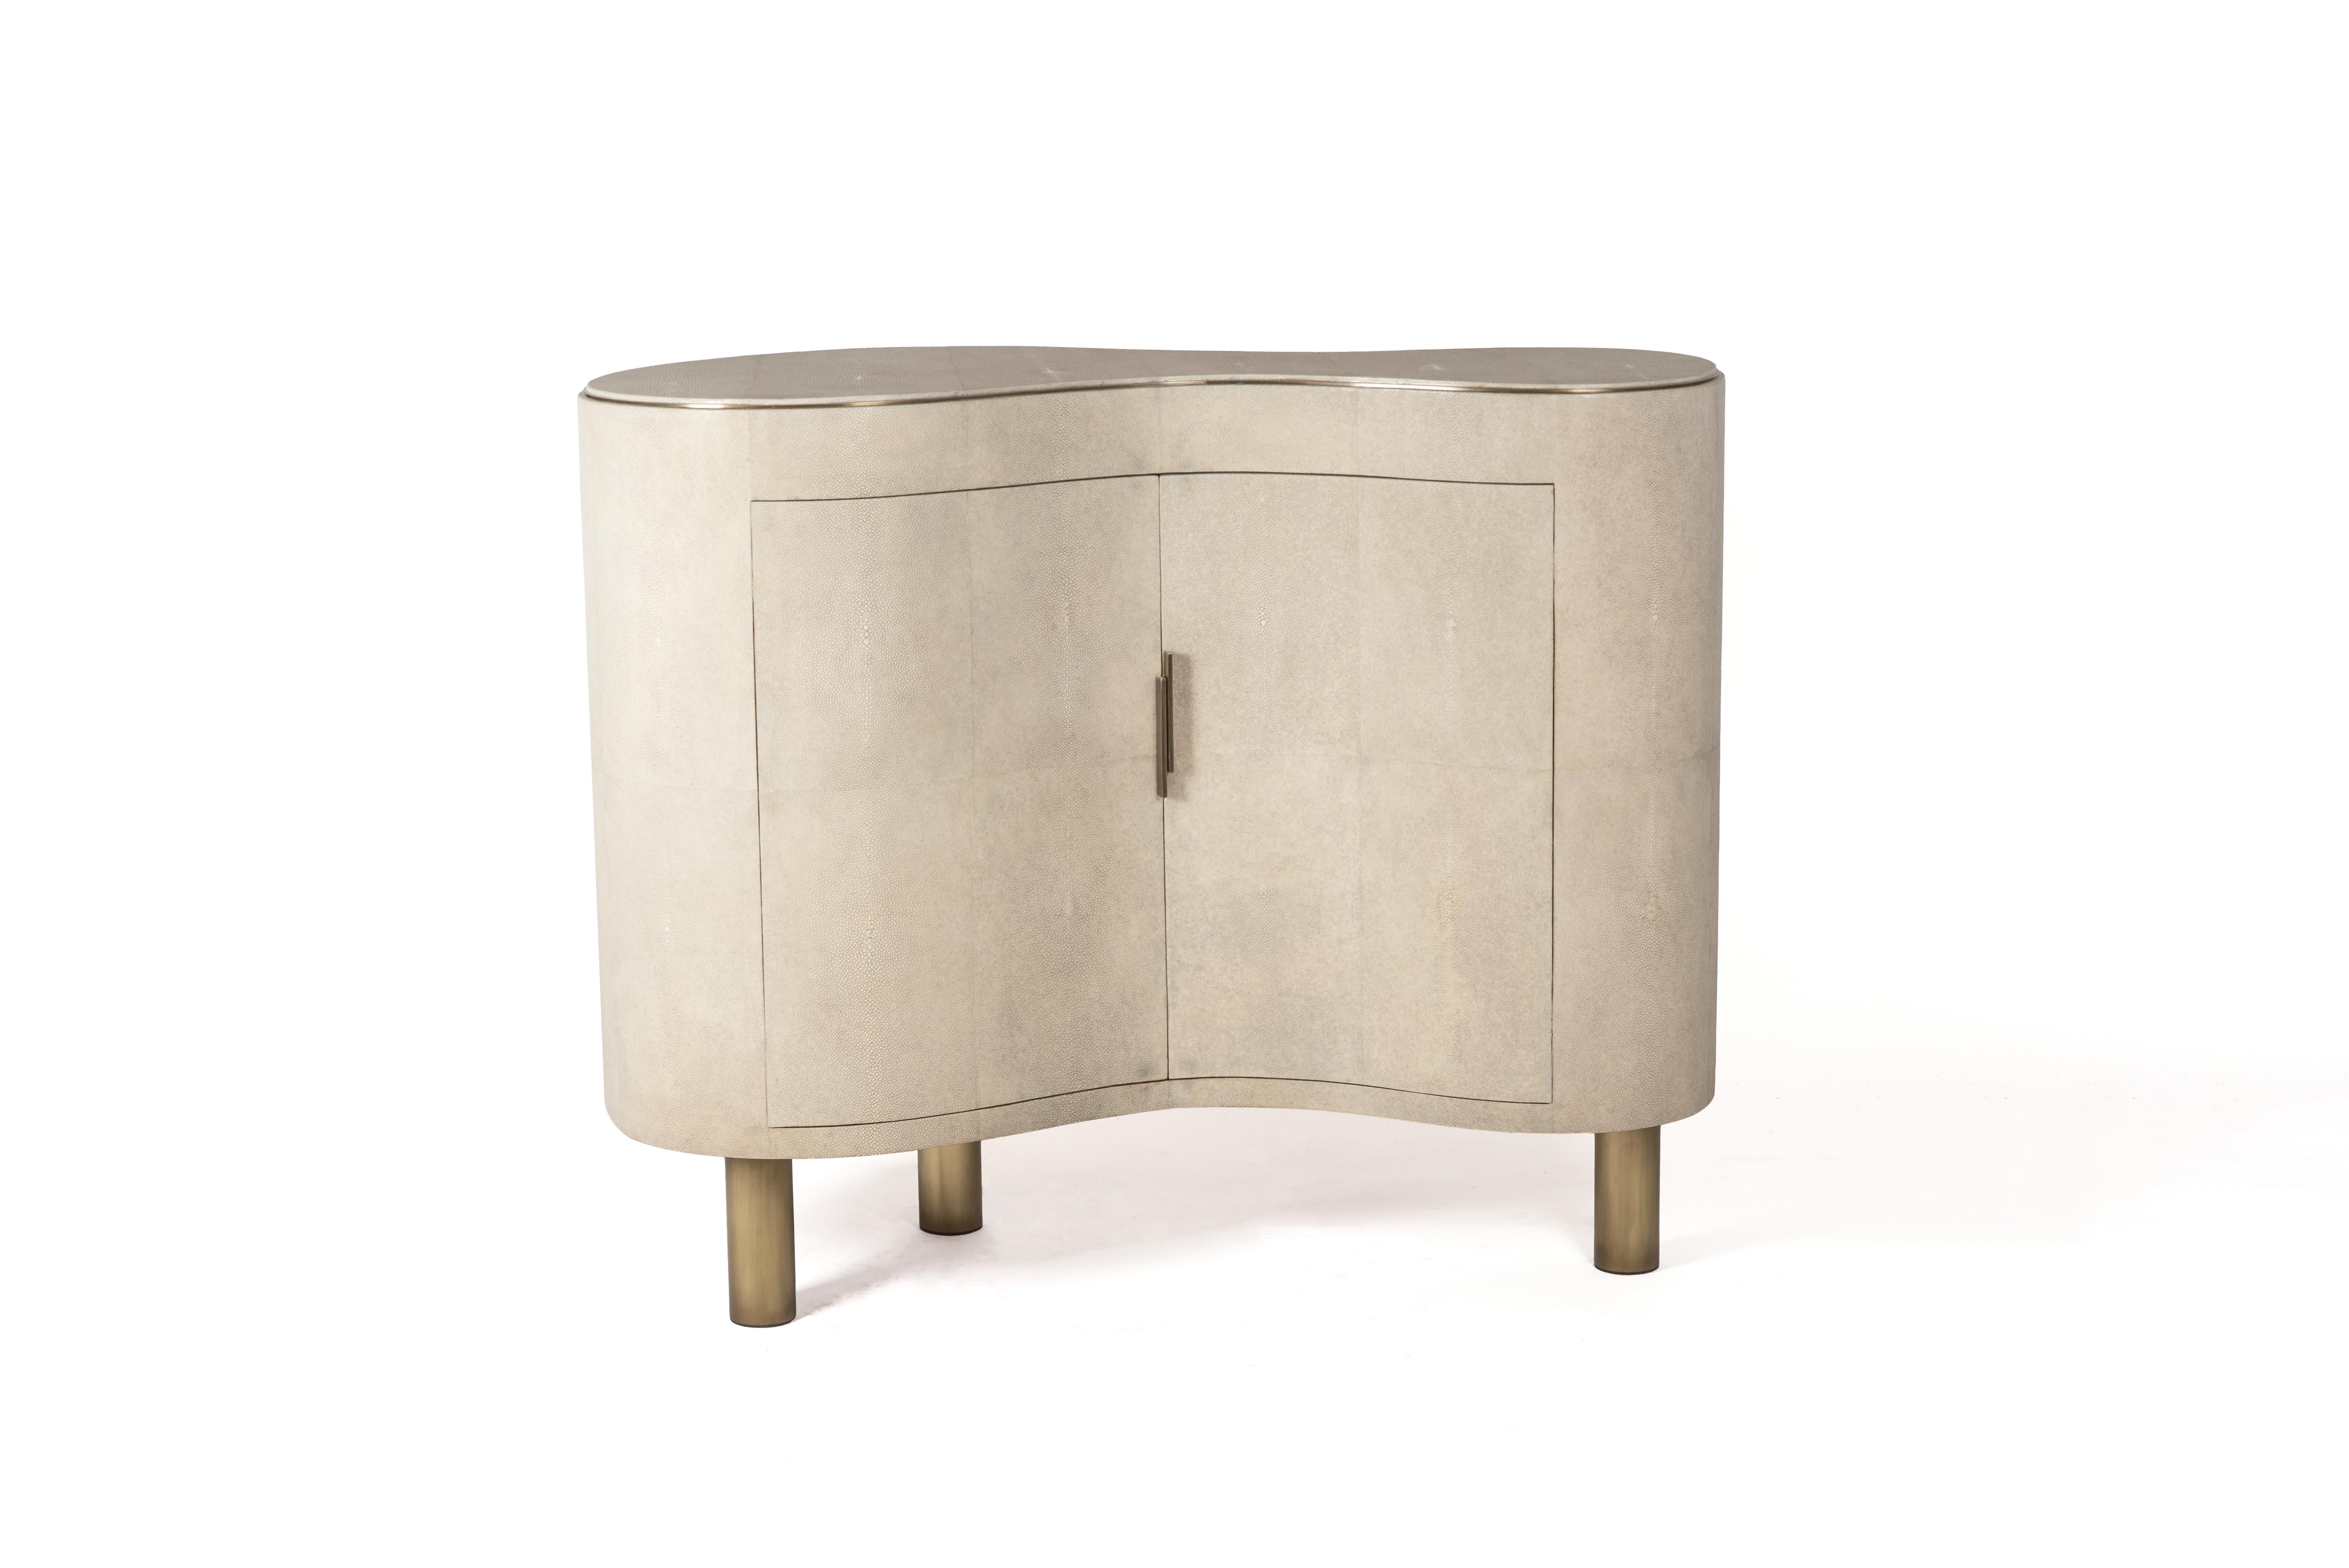 The constellation commode is the perfect storage unit or bar unit for a living room or dining area. The amorphous shaped piece is completely inlaid in cream shagreen. The piece sits on a pair of tubular bronze-patina brass legs. The interior is